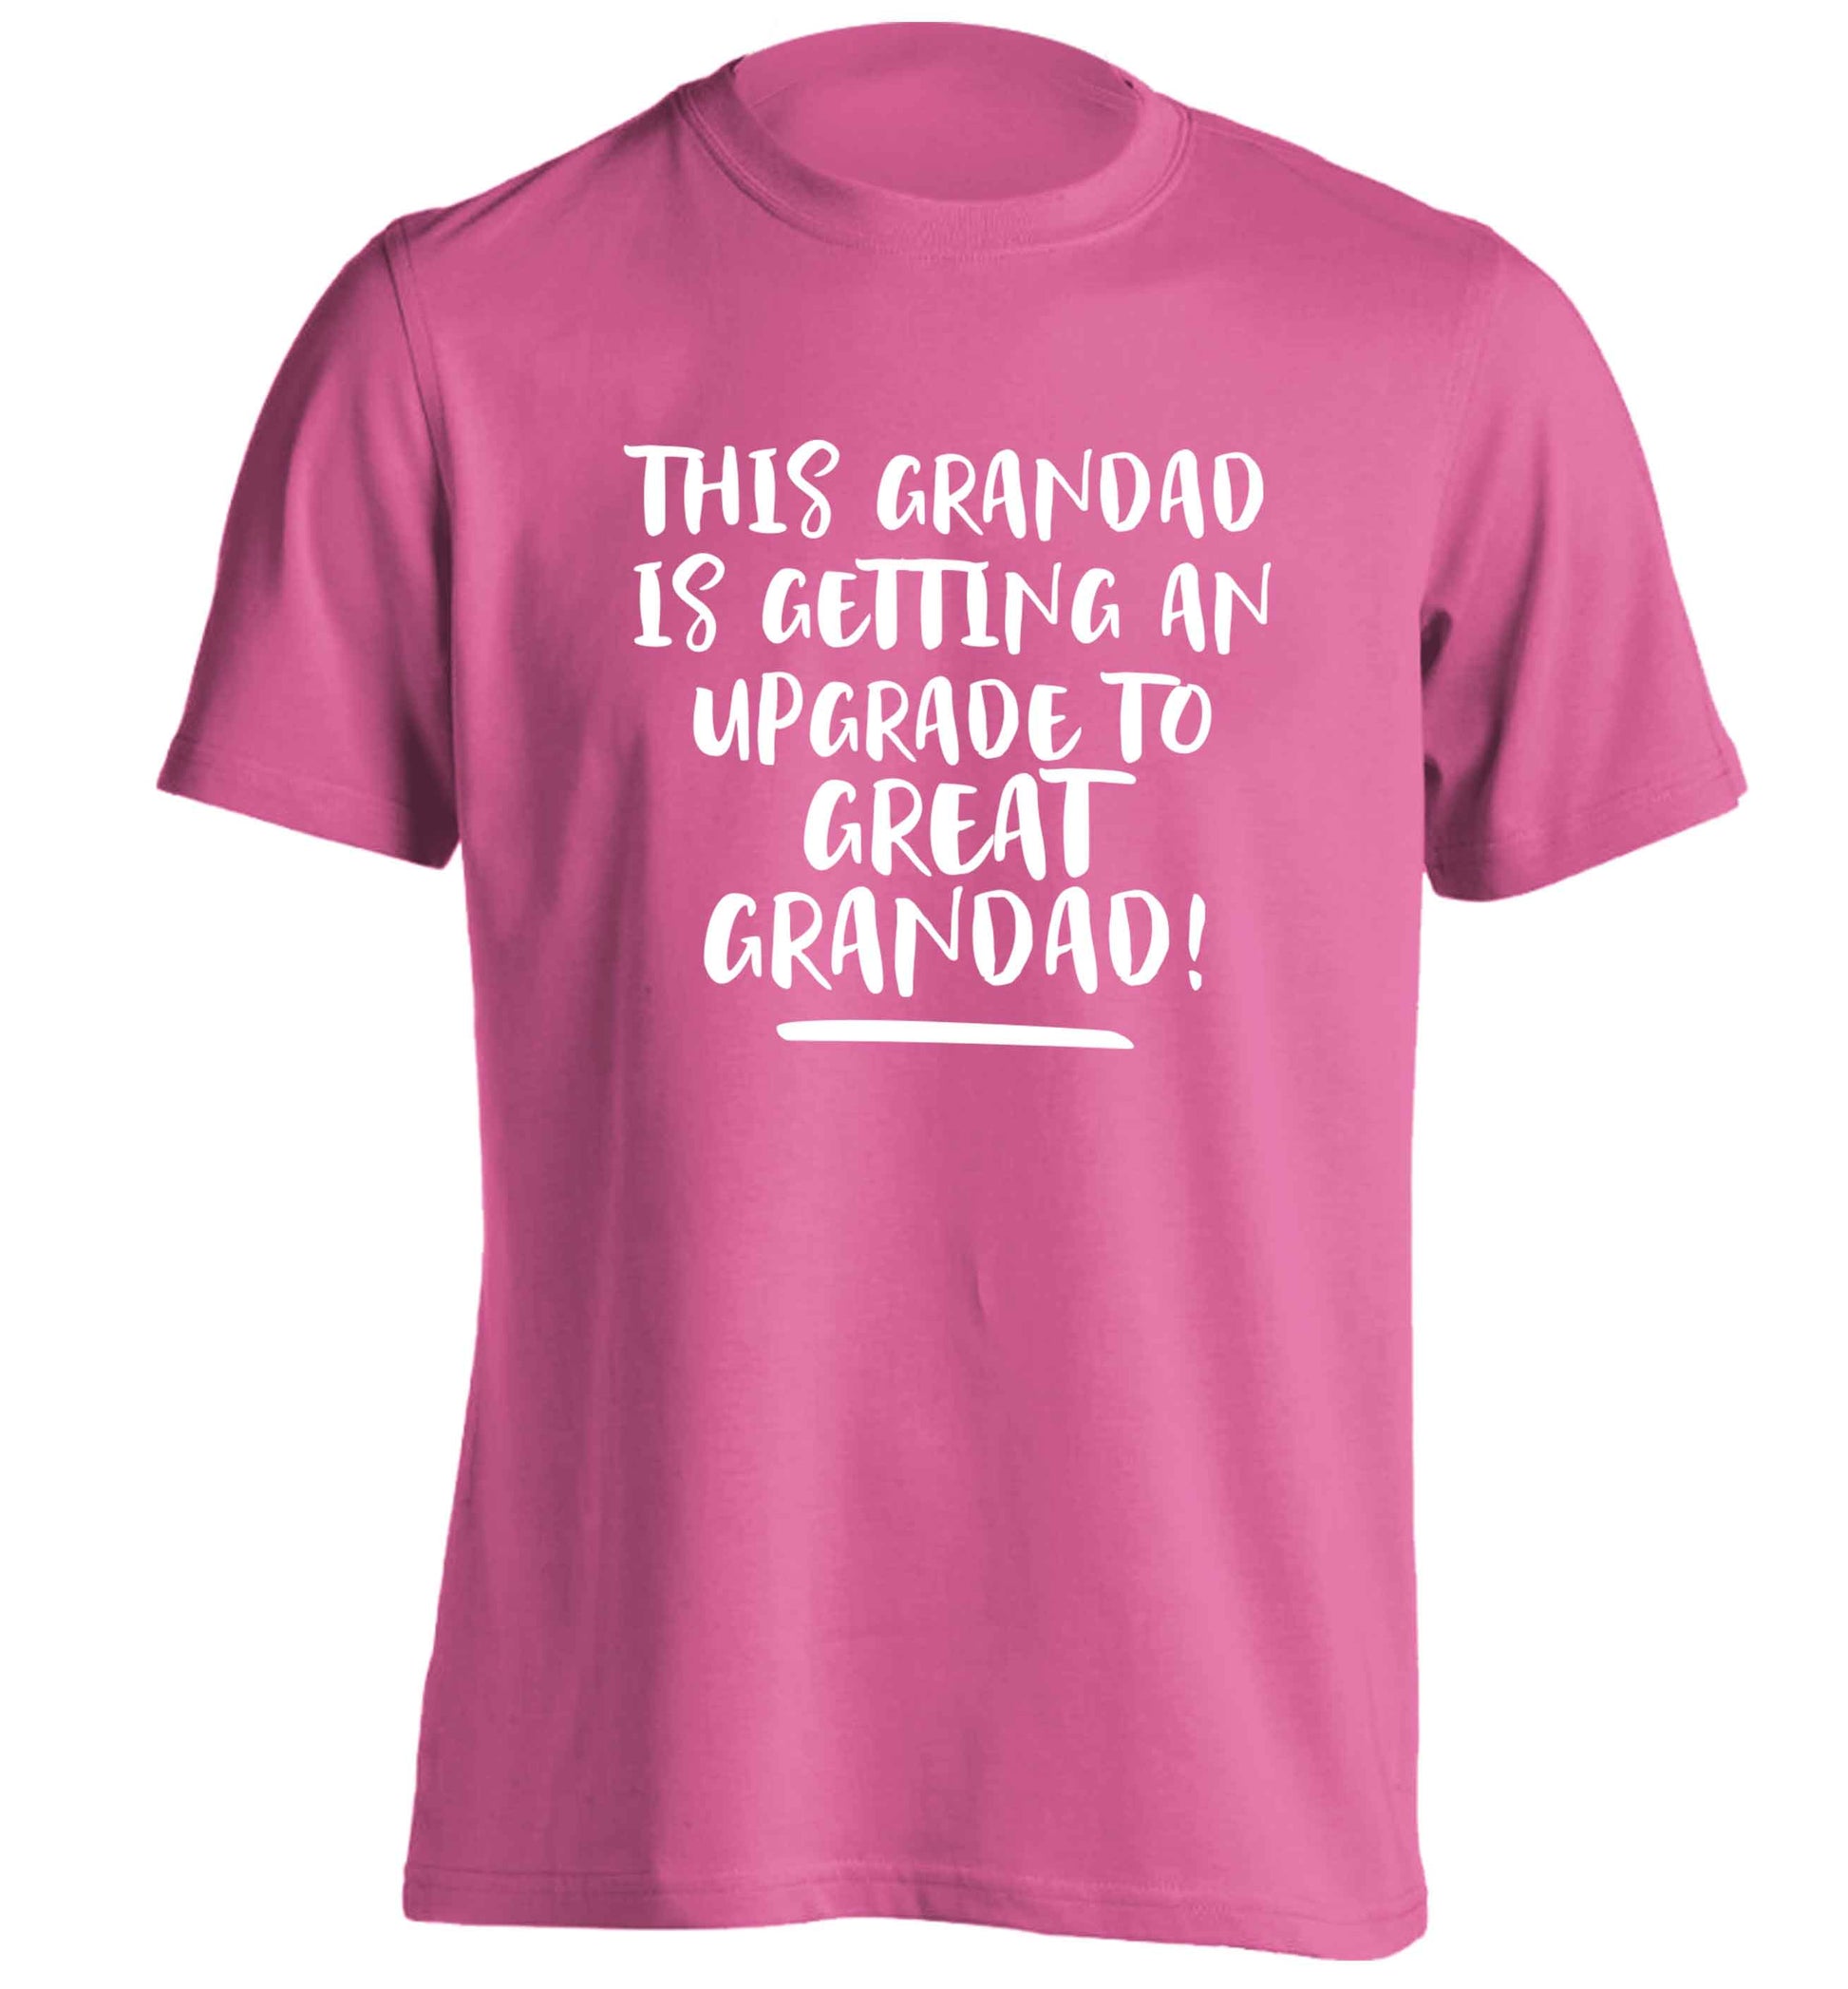 This grandad is getting an upgrade to great grandad! adults unisex pink Tshirt 2XL